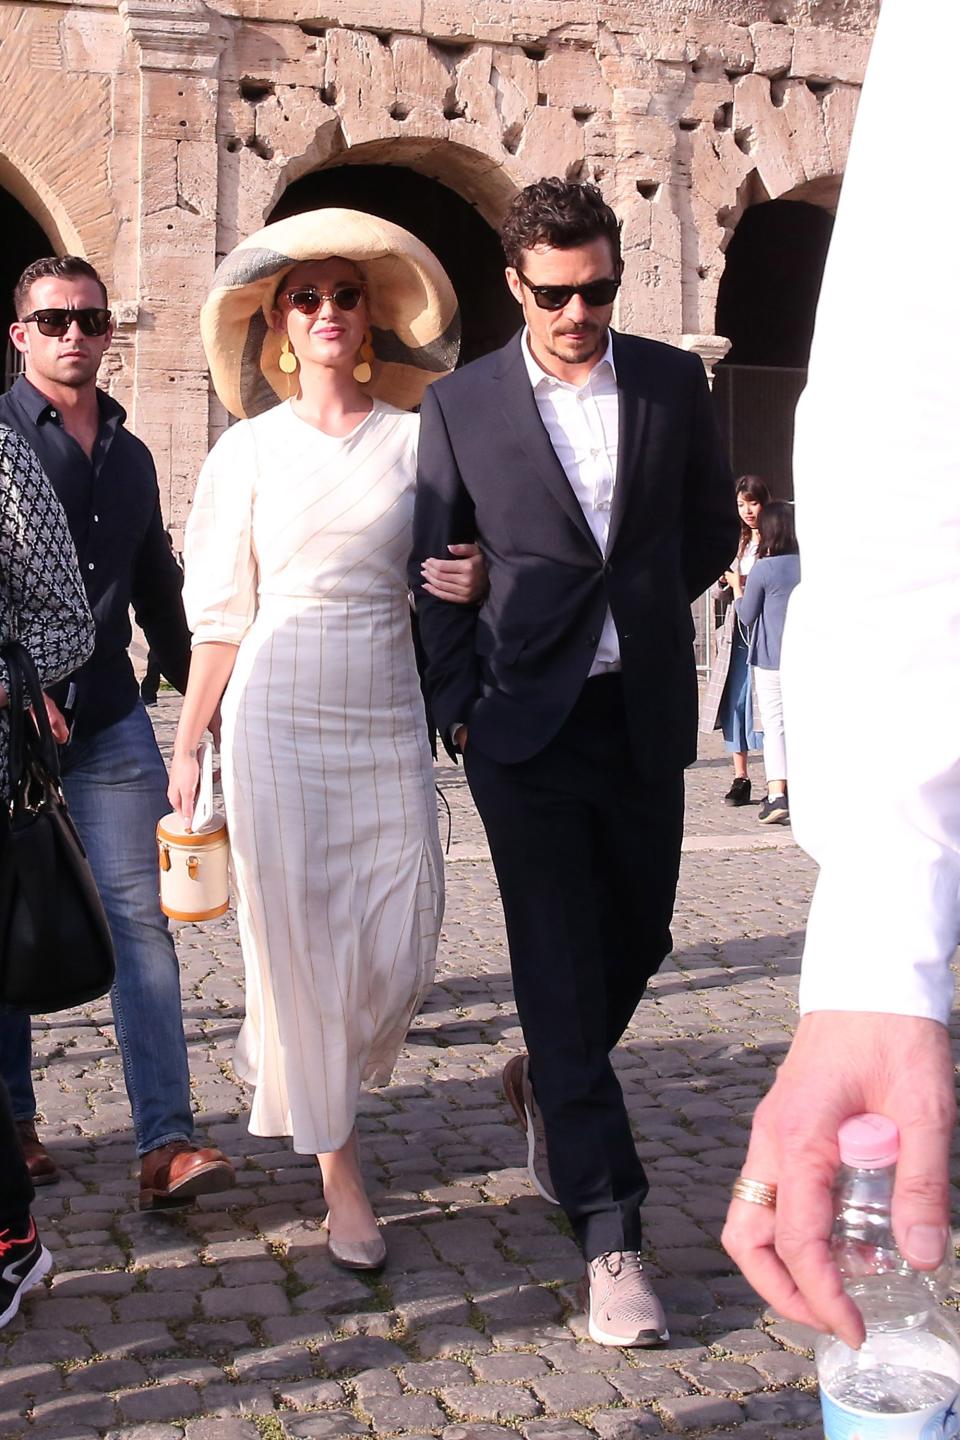 The on-again couple sported complementary looks on a Roman holiday.